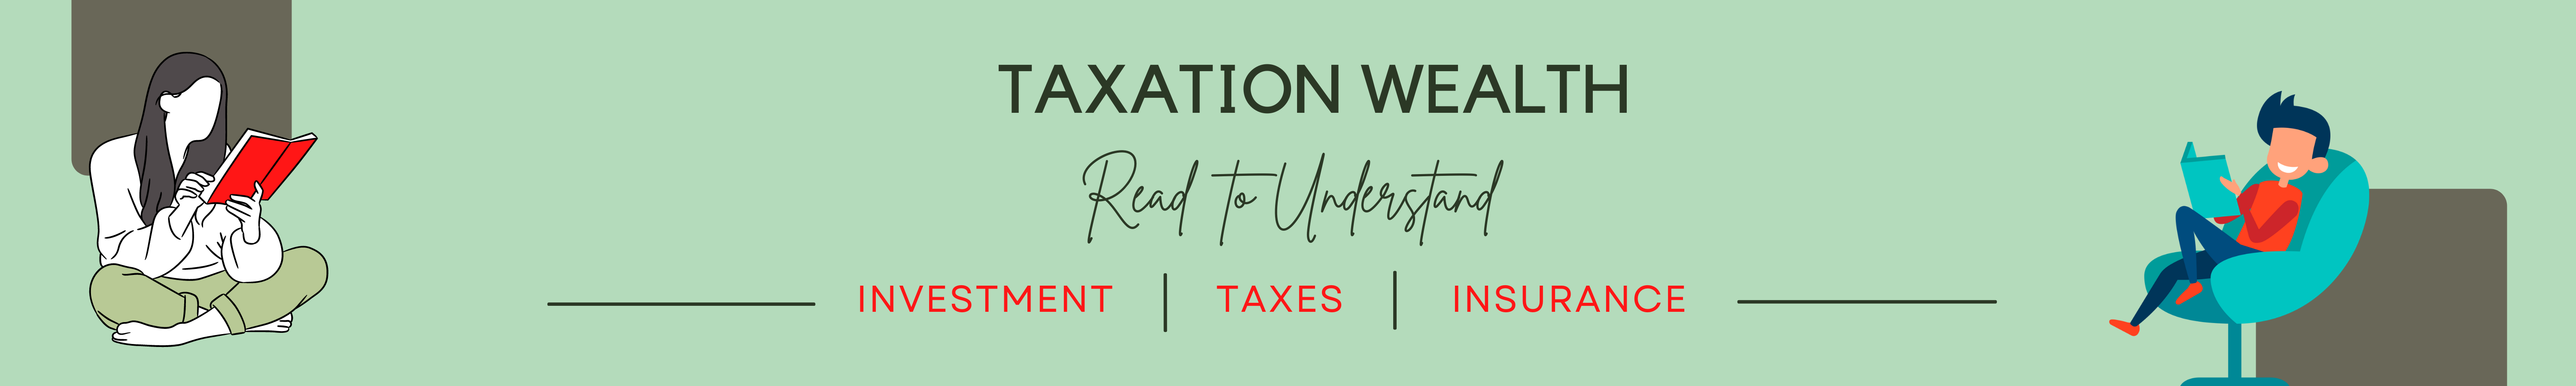 What Blog of Taxation wealth constitutes?